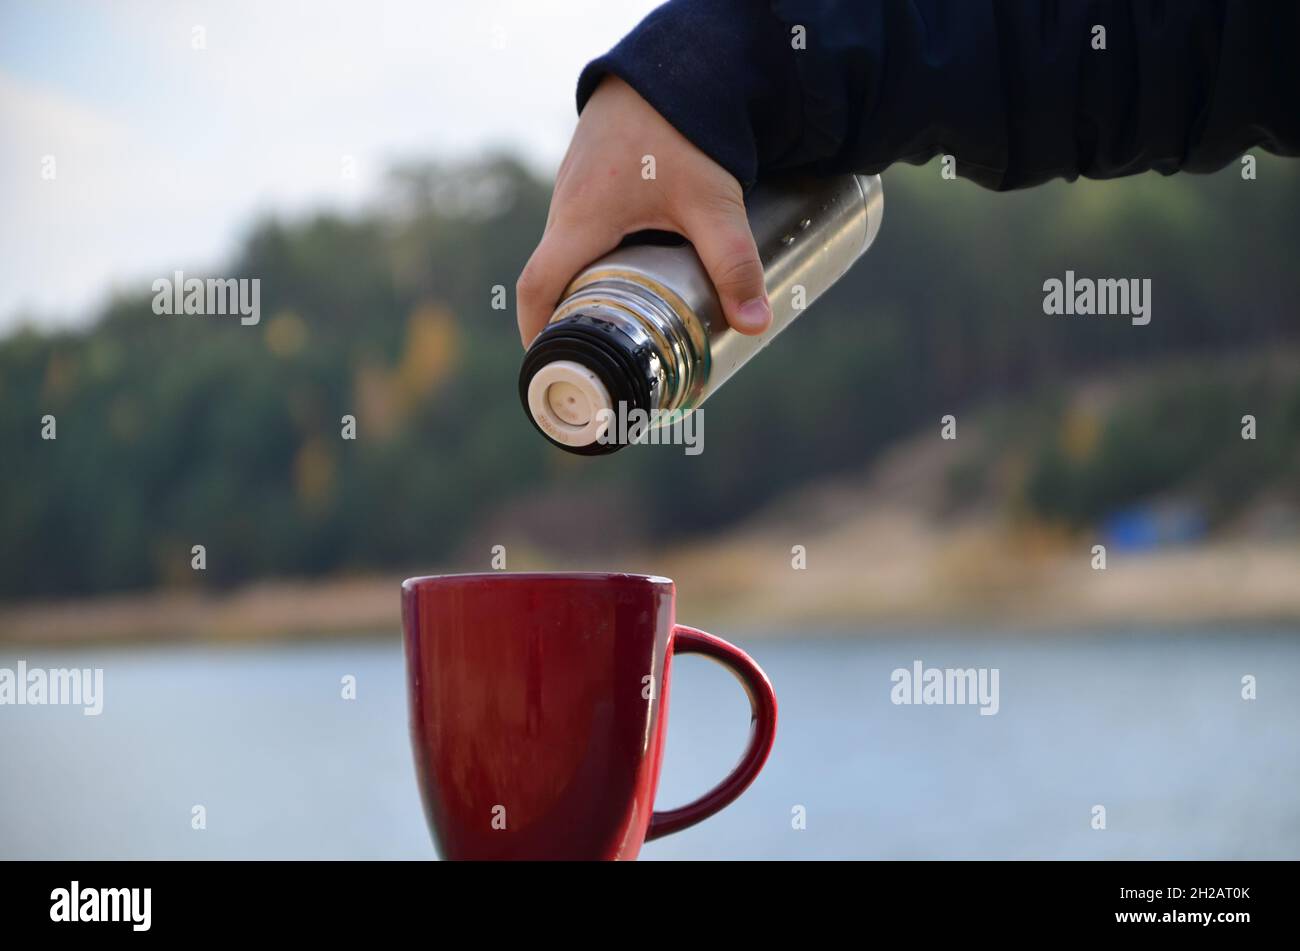 Winneconne, WI - 5 May 2019 : A package of Gunuine Thermos brand travel  tumbler on an isolated background Stock Photo - Alamy